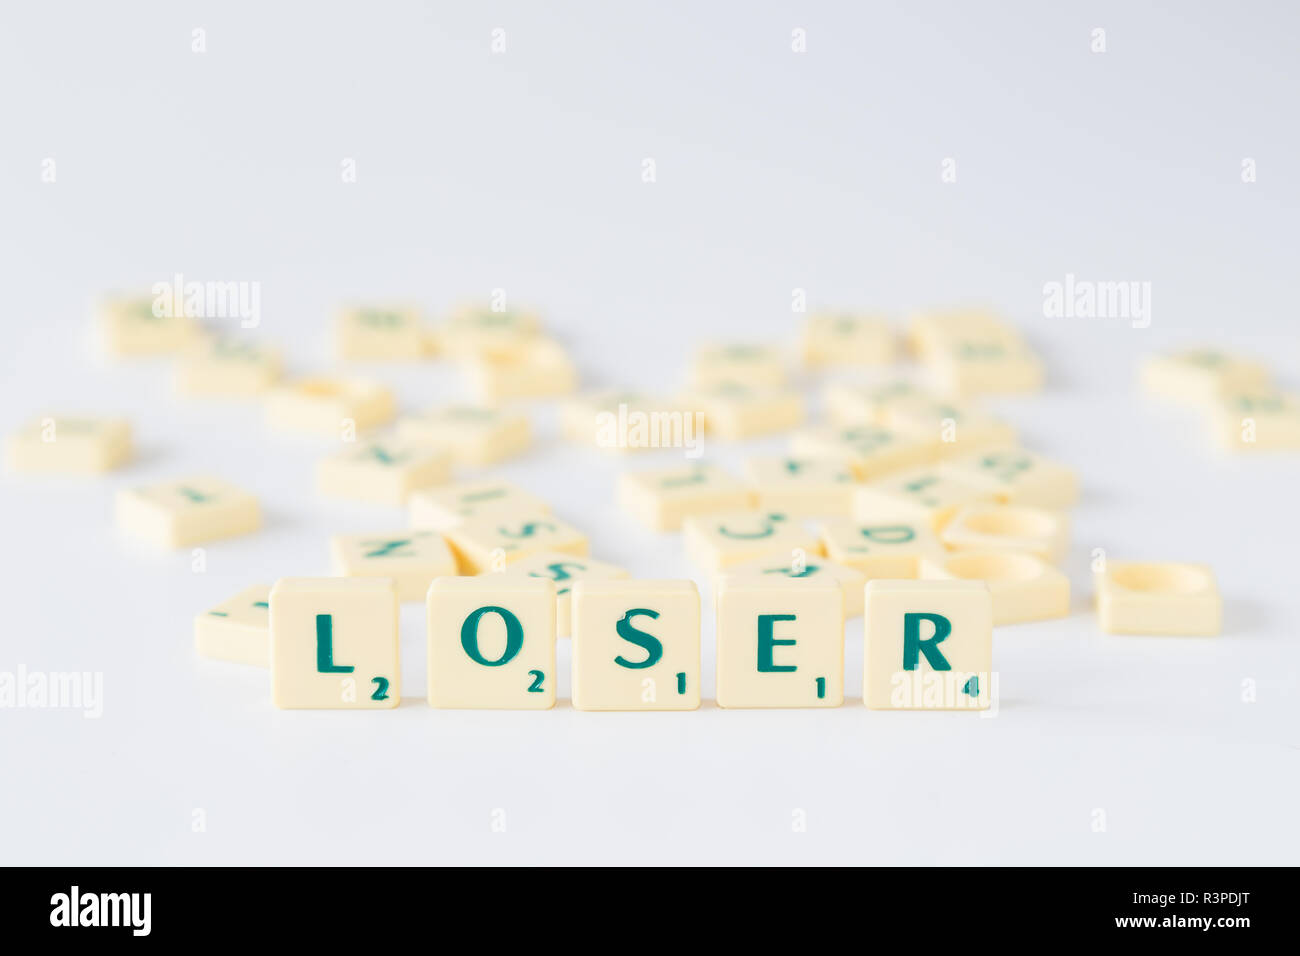 Focus on the word "Loser" made of Scrabble game letter tiles with score value, random tiles mixed up in the background. Shallow depth of field. Stock Photo